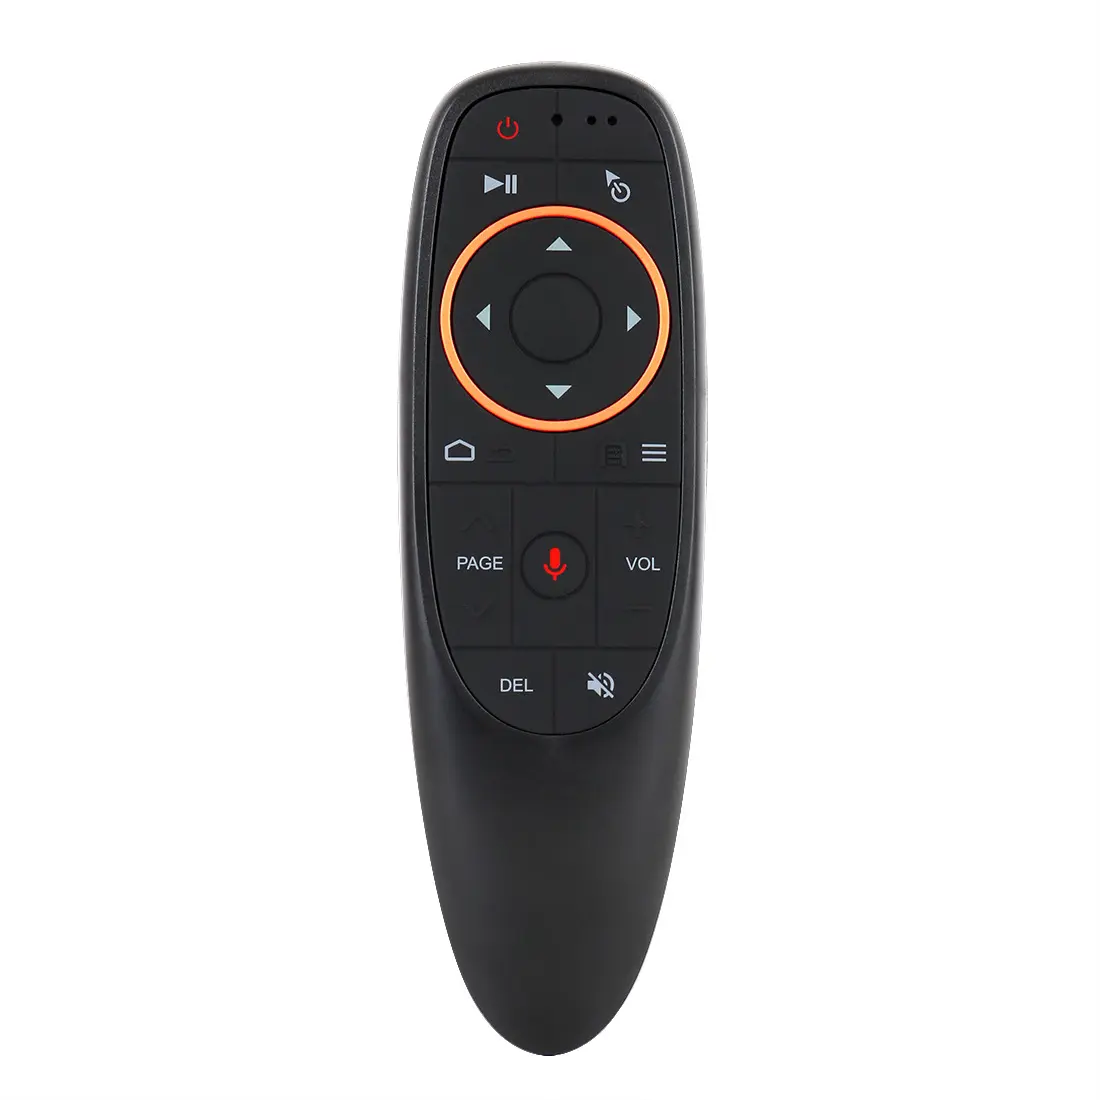 Air mouse G10S G10BTS G10Spro G10pro BTS 2.4G Wireless mouse keyboard Gyro google Voice Remote Control use for Android TV Box